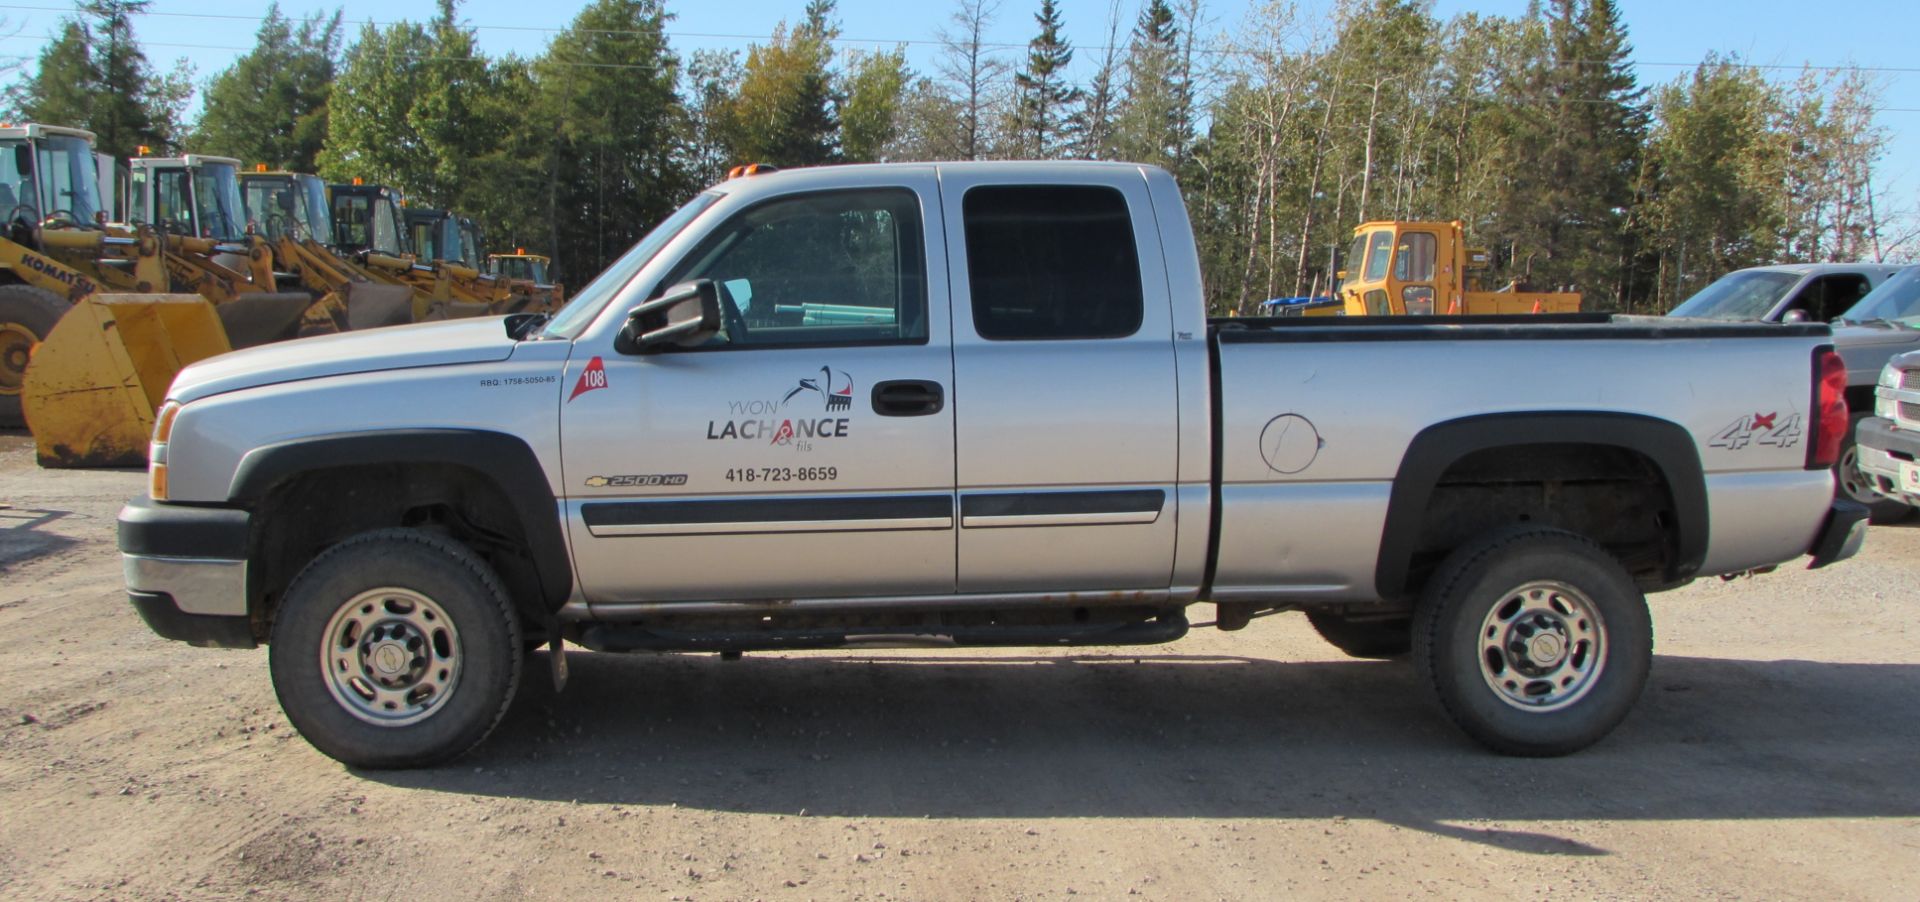 2007 CHEVY SILVERADO 2500HD PICK UP C/W EXTENDED CAB, 4X4, APPROX. 197,000KM (SHOWING ON METER) - Image 3 of 6